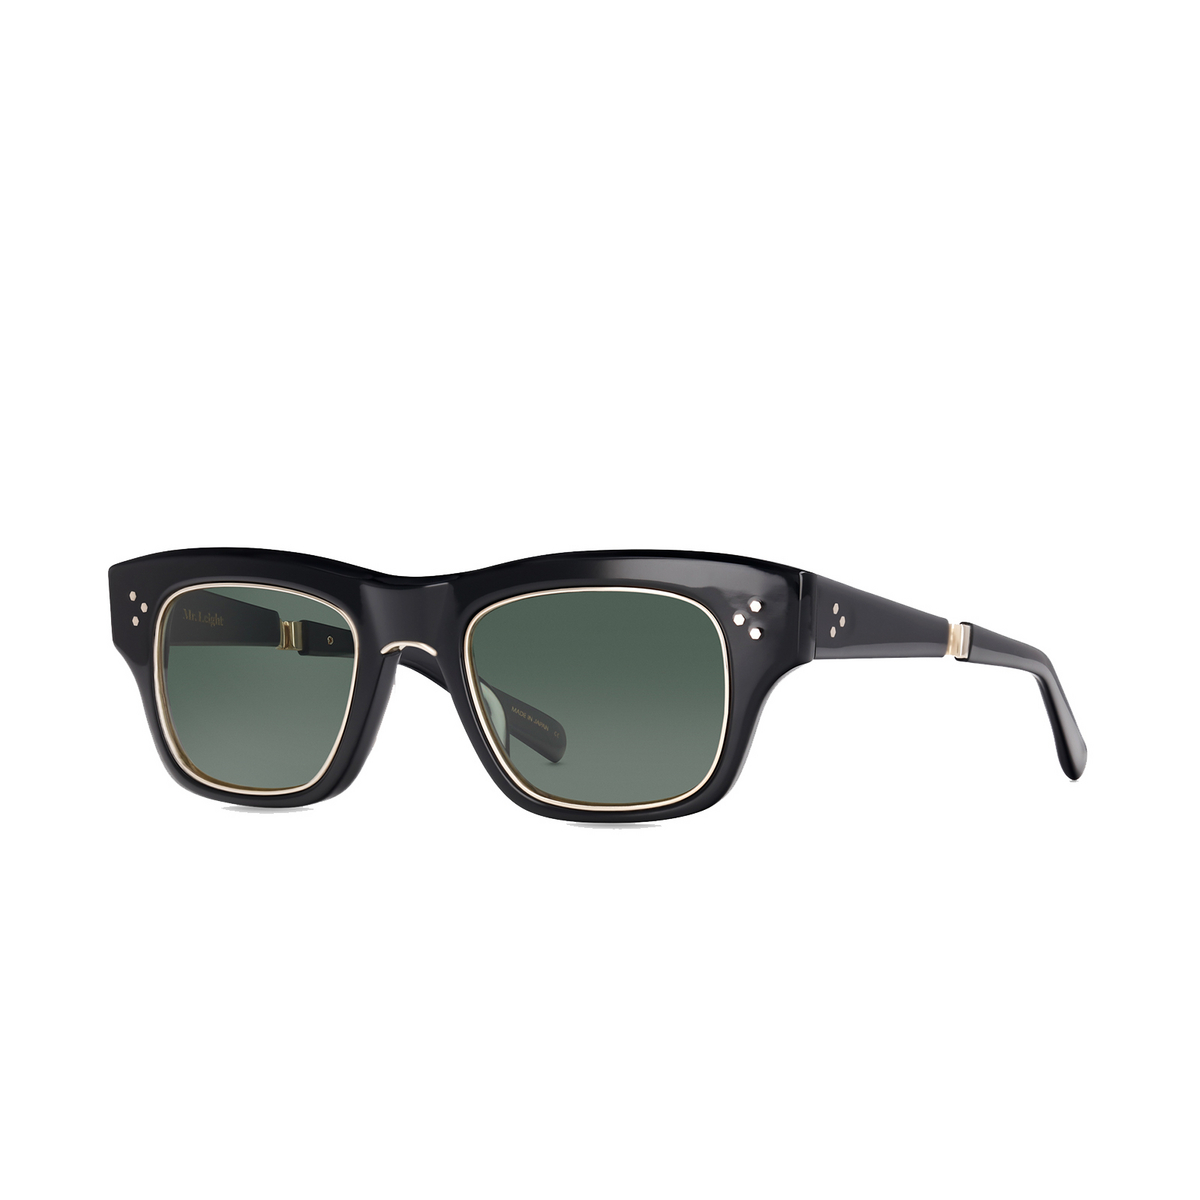 Mr. Leight® Square Sunglasses: Go S color BK-12KWG/G15GLSSPLR - three-quarters view.